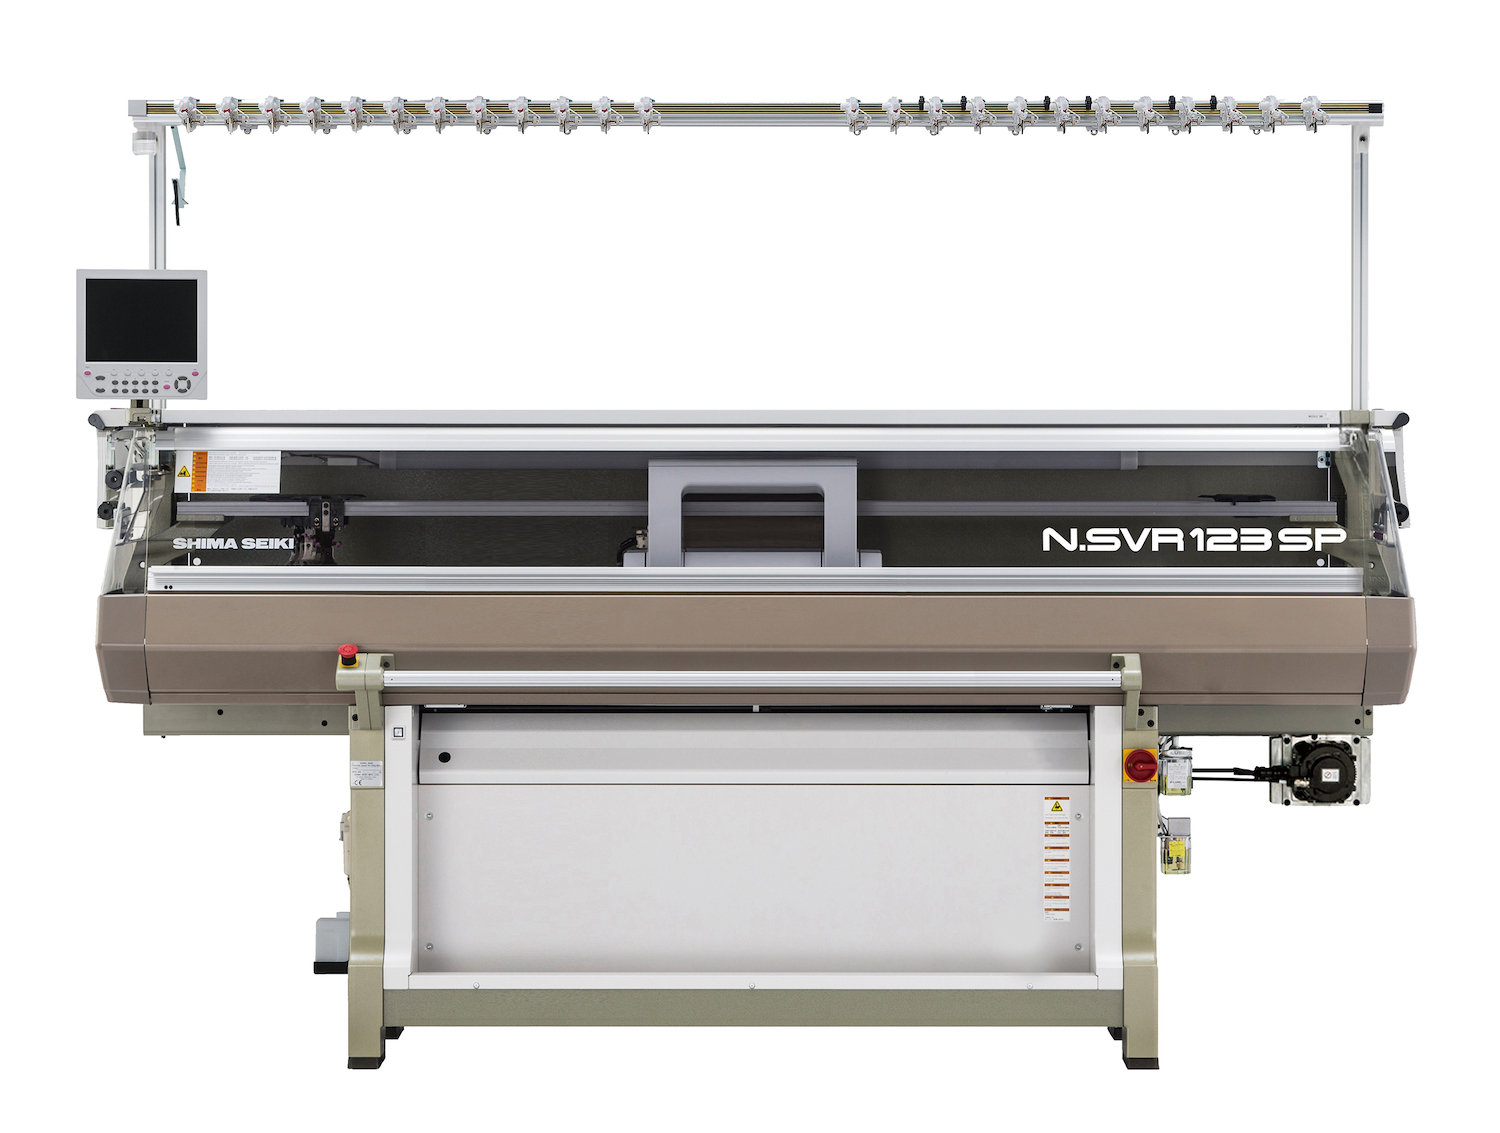 The N.SVR 123SP computerized knitting machine features a special loop presser bed, capable of producing hybrid inlay fabrics with both knit and weave characteristics. © Shima Seiki